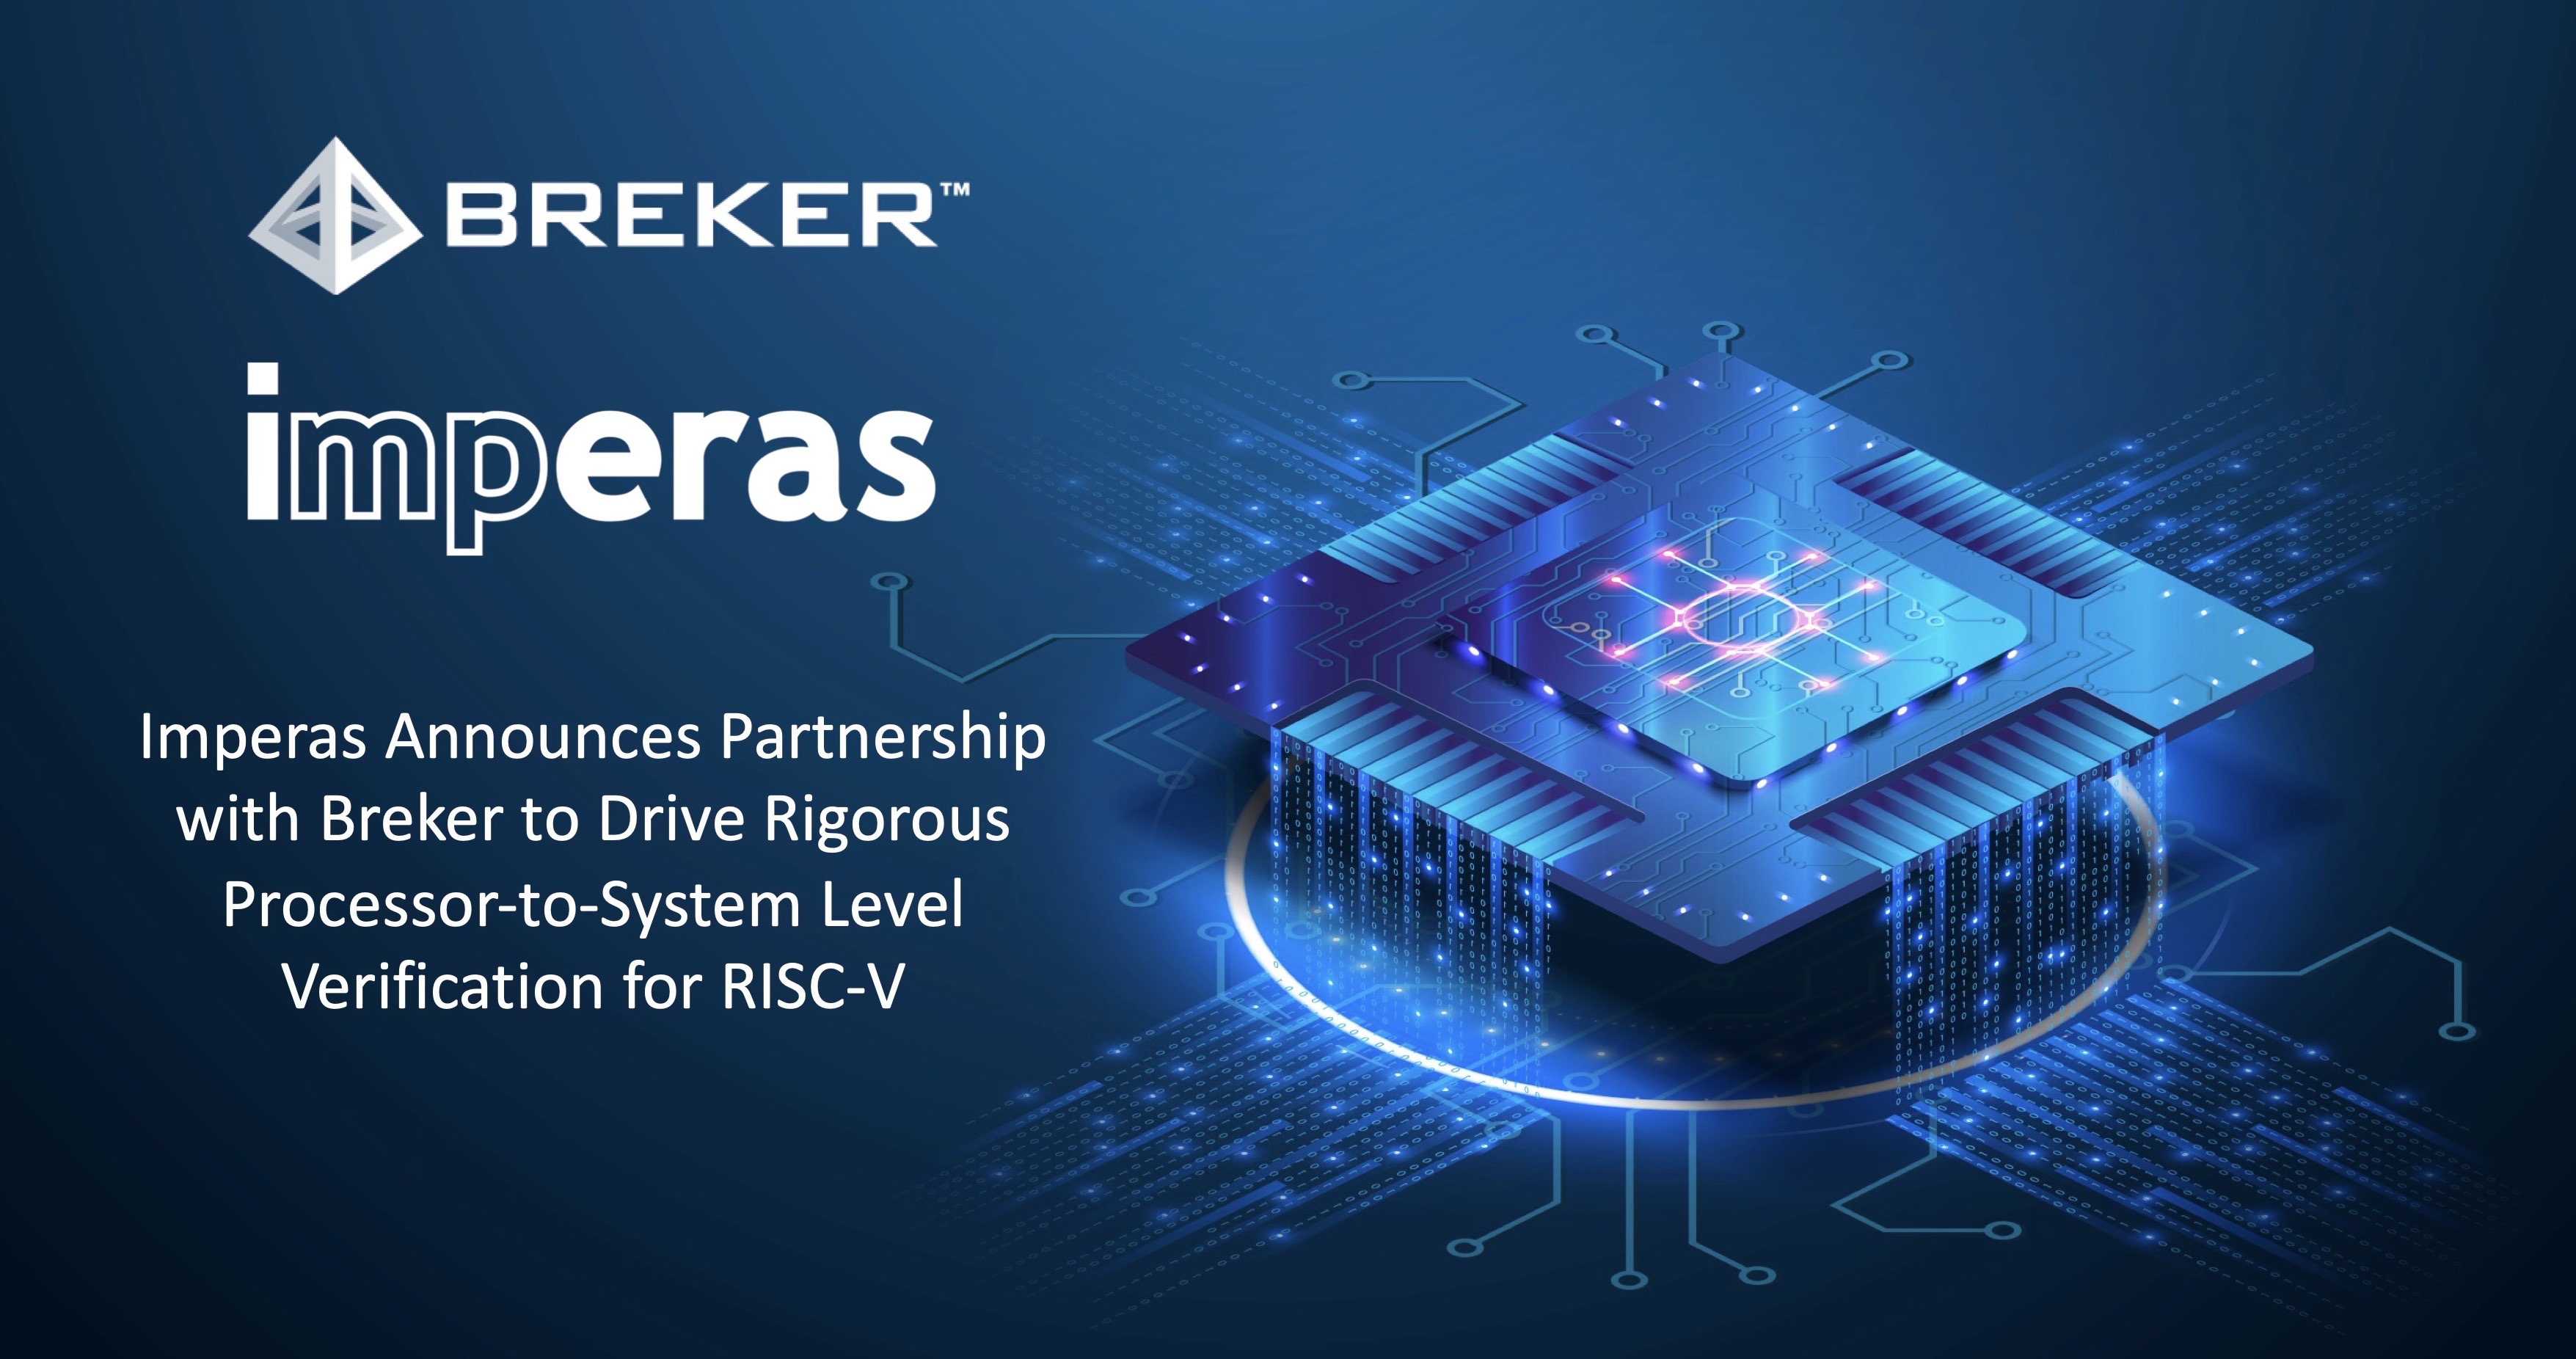 Imperas and Breker partnership for processor-to-system level verification for RISC-V